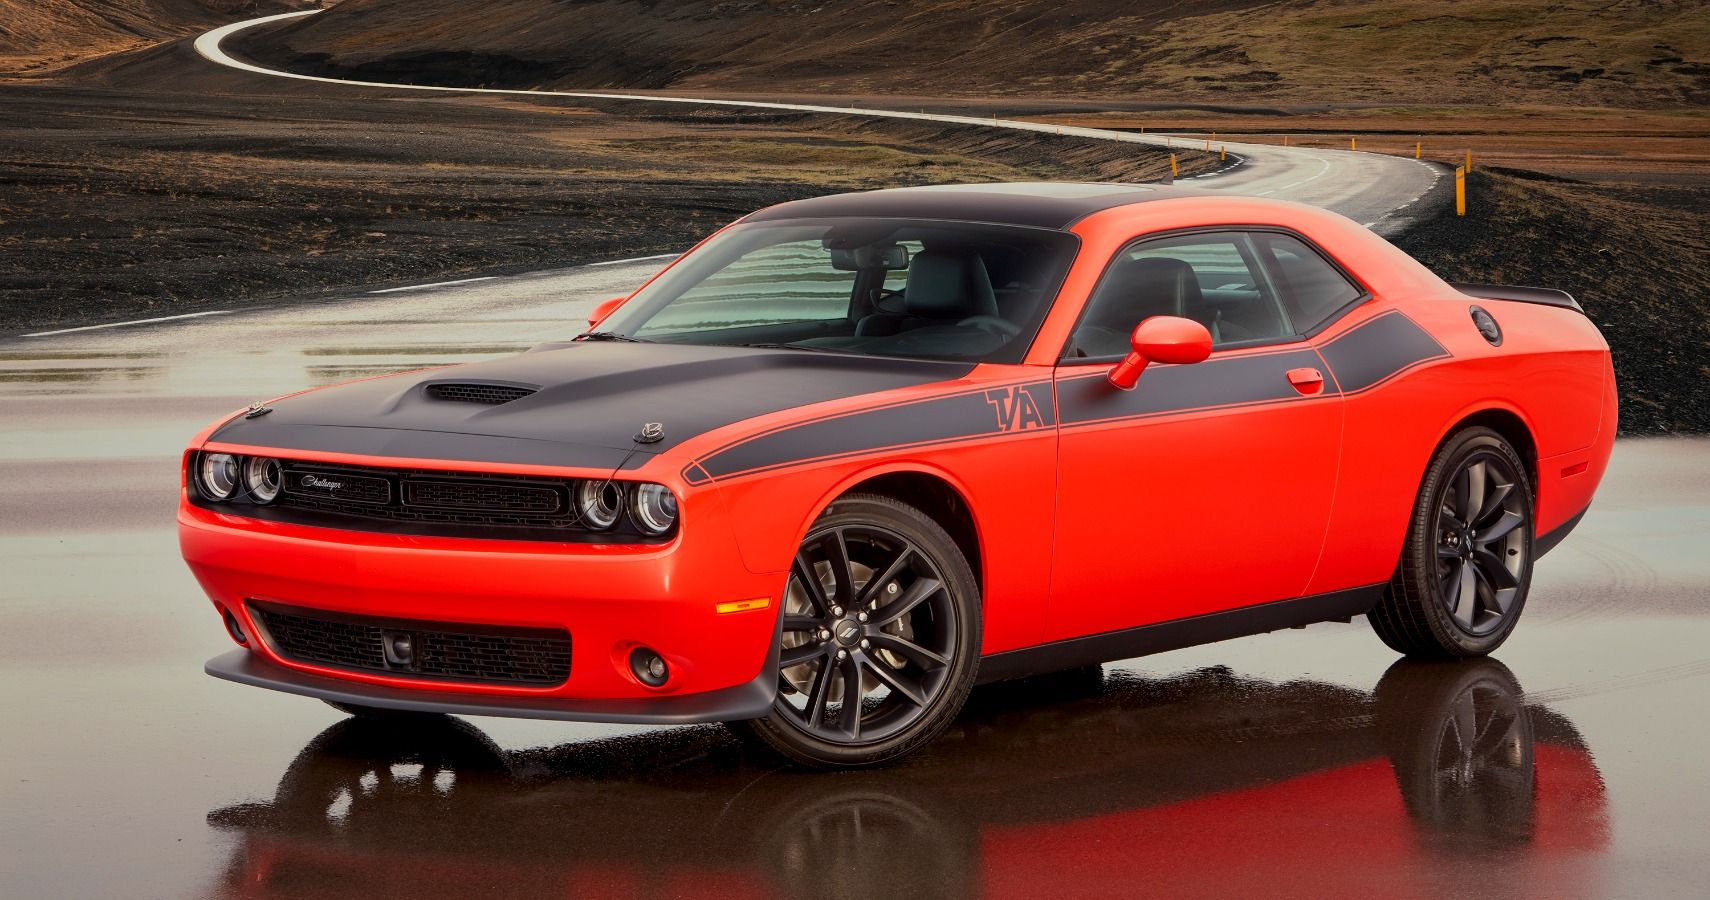 Here Are The Biggest Problems With Dodge Challenger Ownership